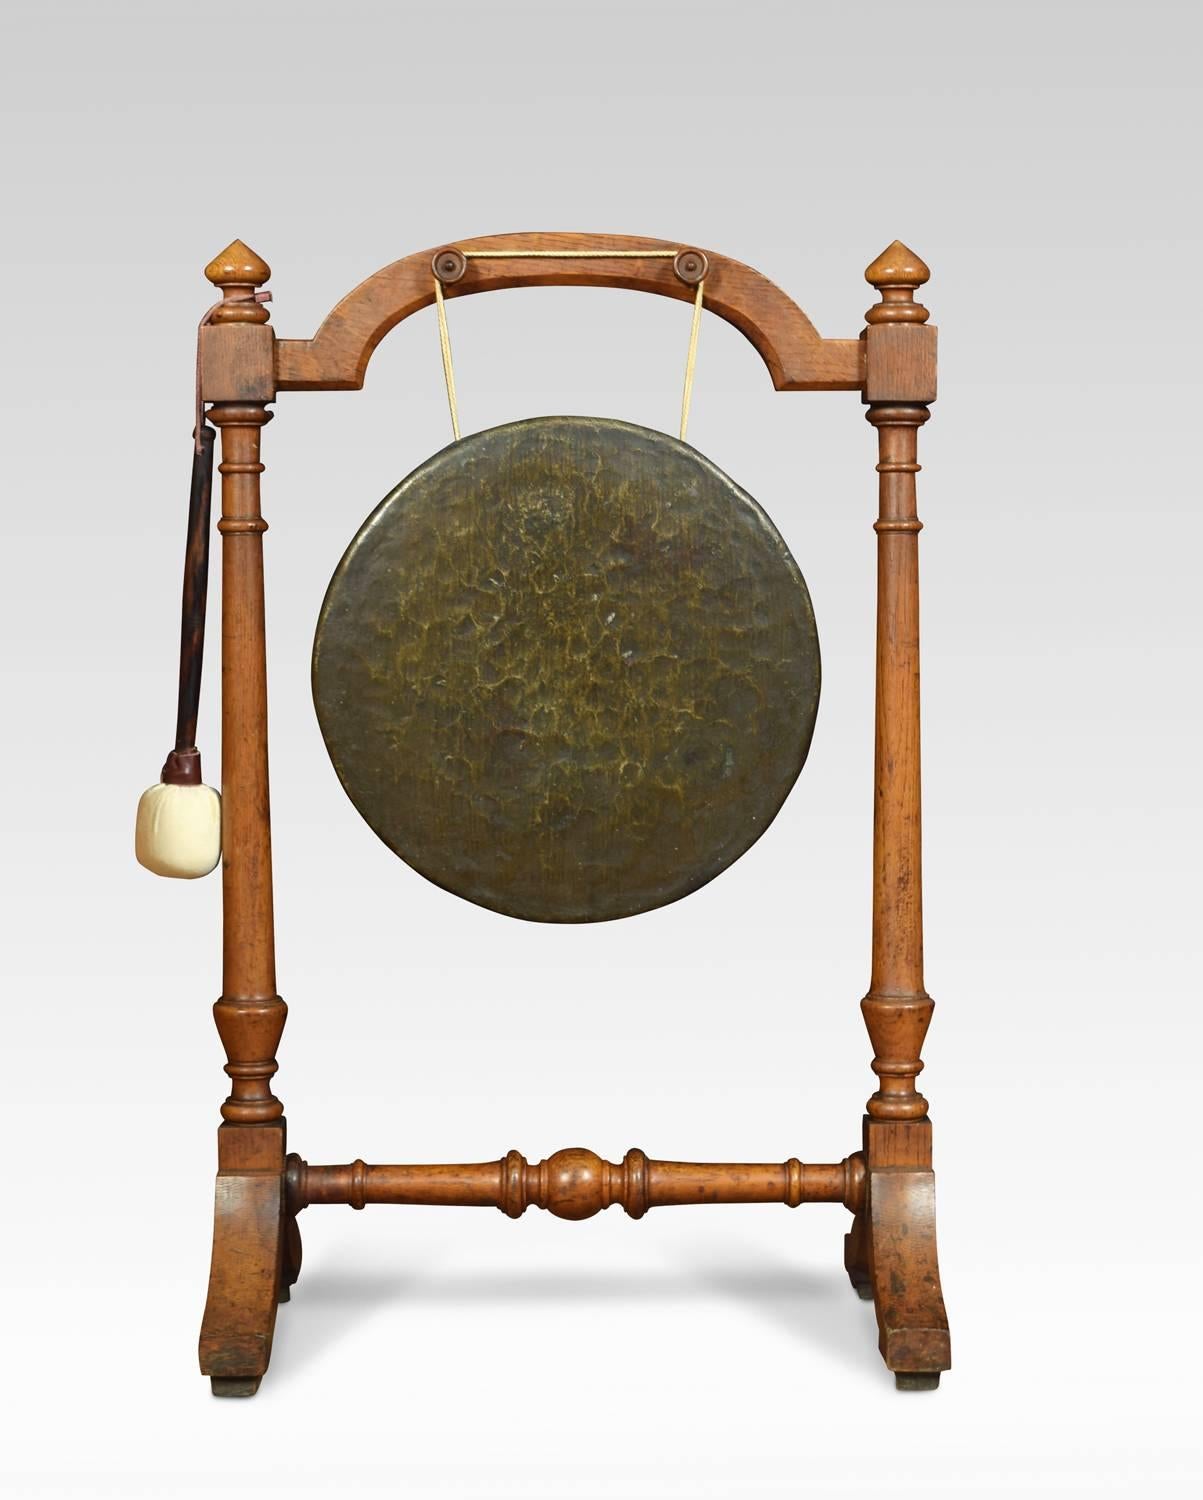 Late Victorian walnut framed brass dinner gong and beater, the stand having carved finials above two turned supports having suspended brass gong to centre raised up on shaped feet.
Dimensions:
Height 33 inches
Width 21.5 inches
Depth 13.5